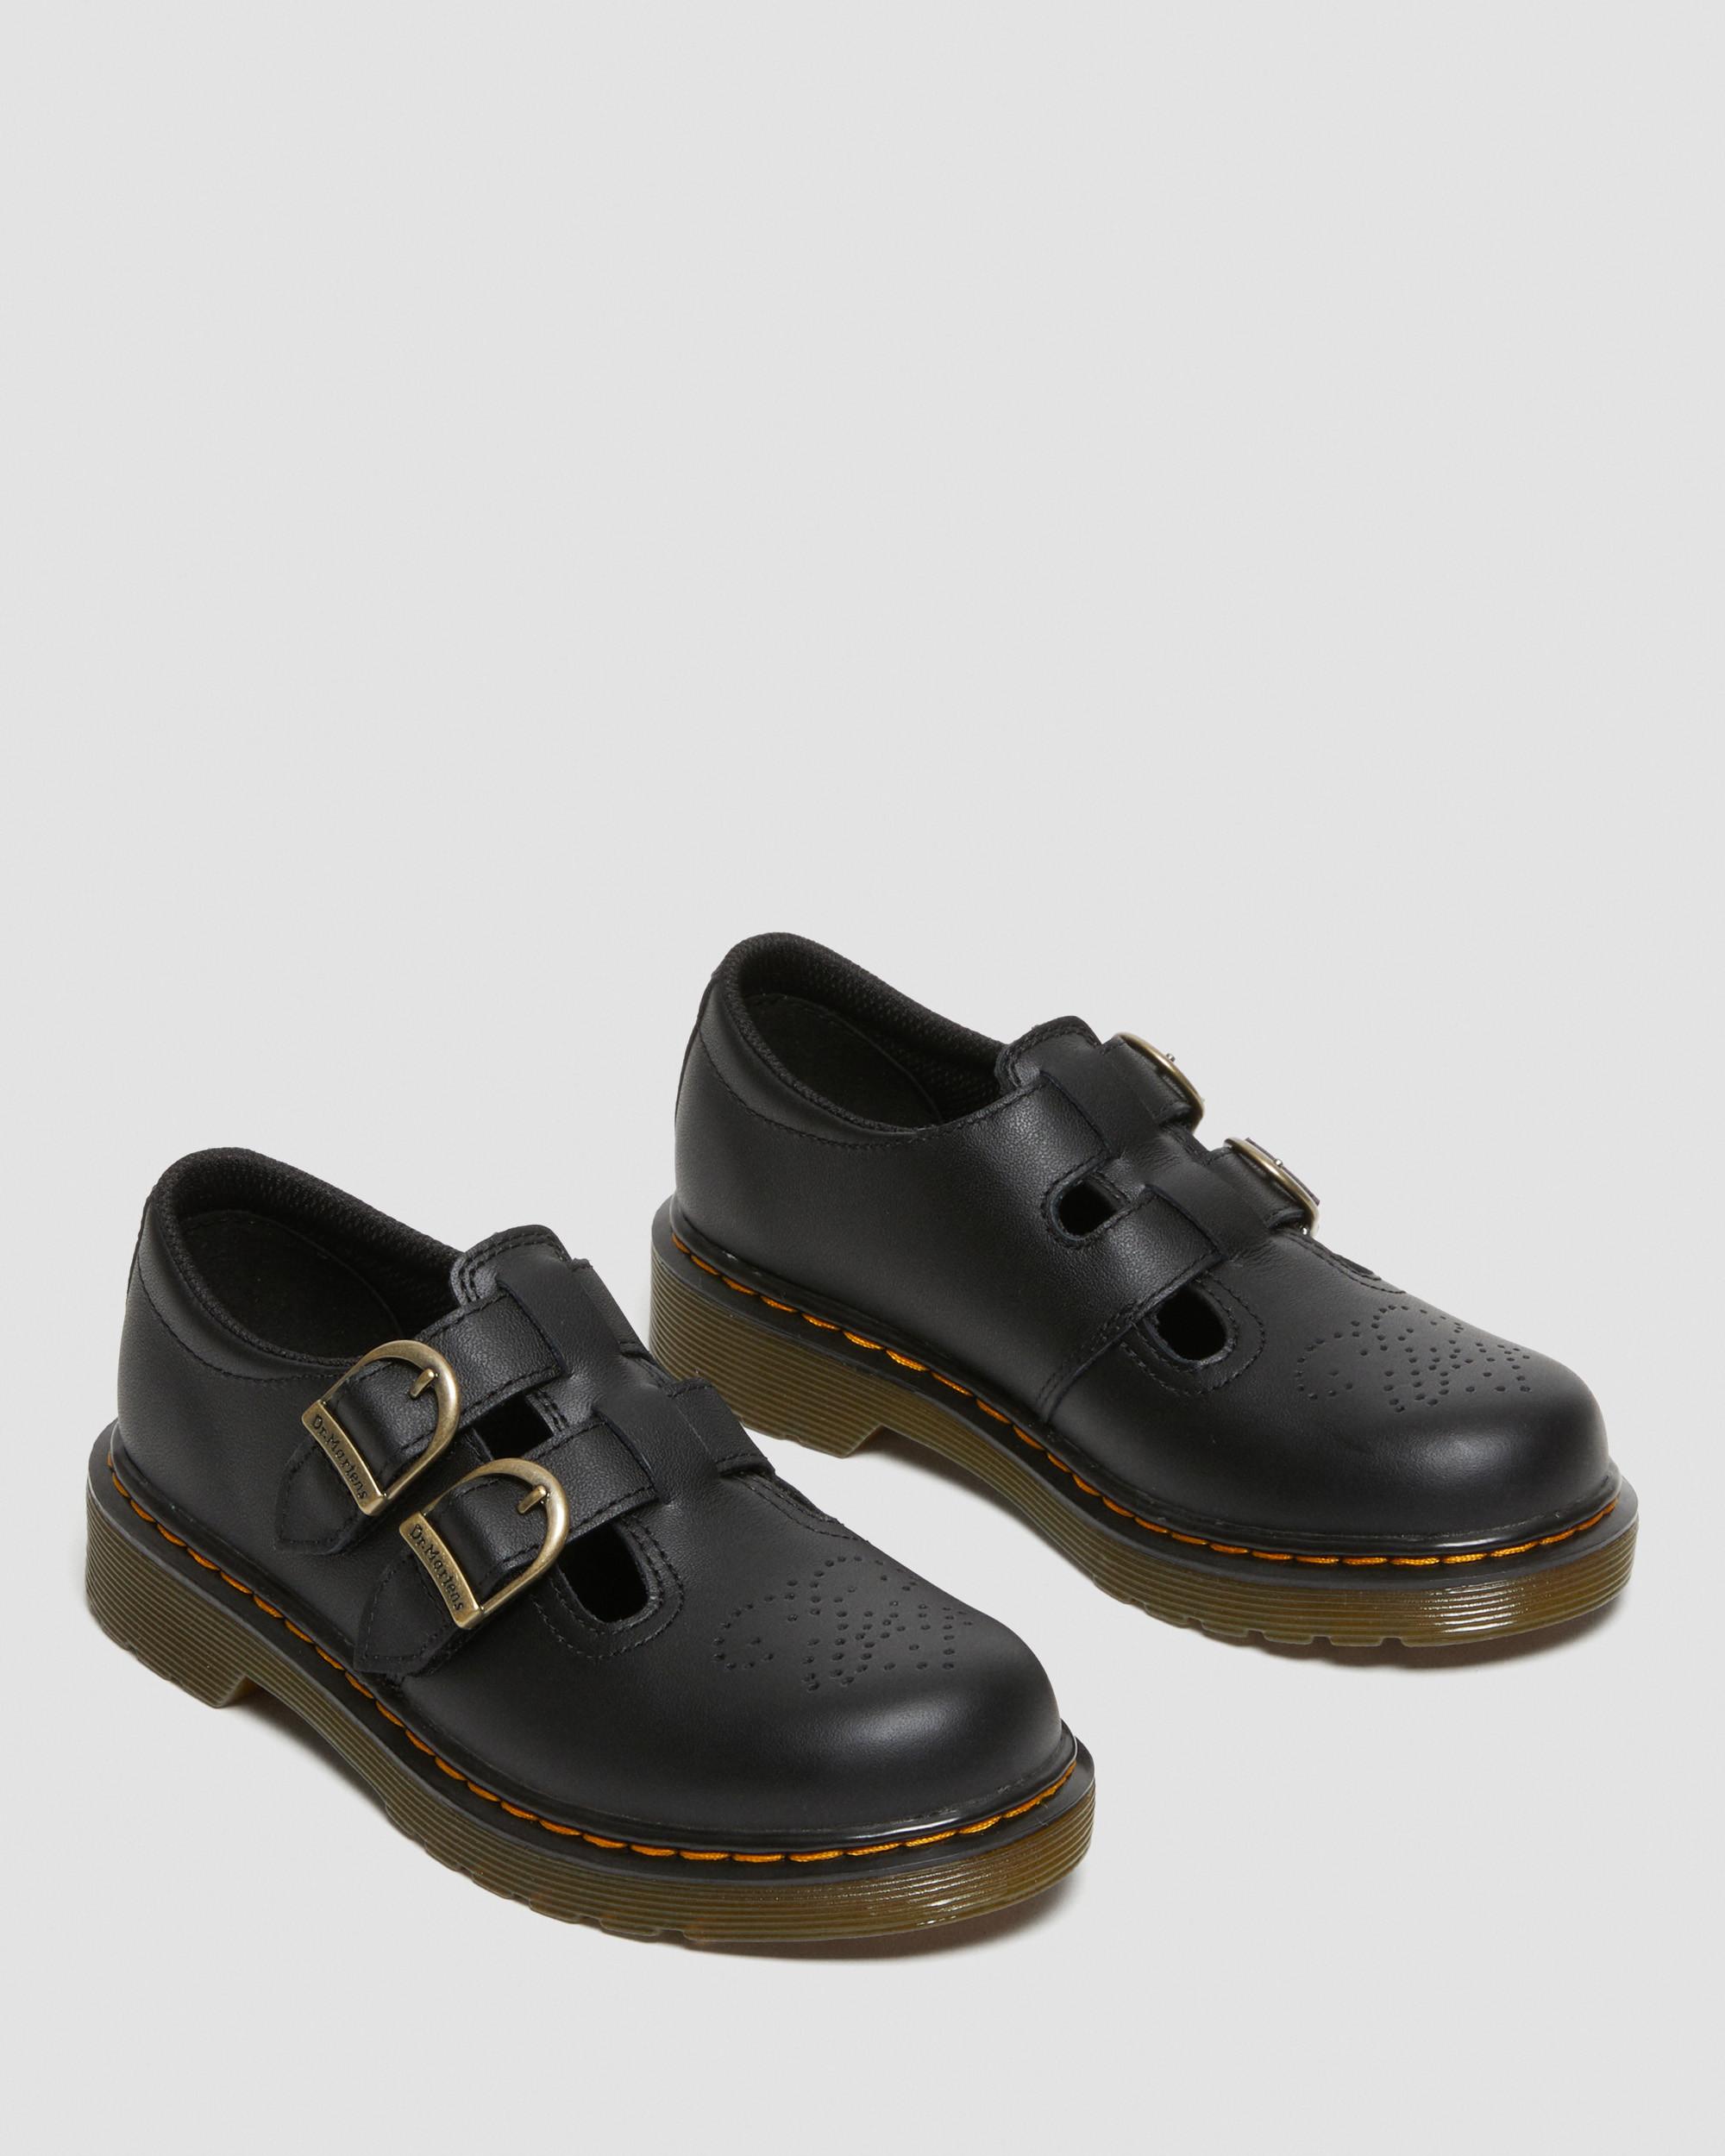 8065 Softy T Junior Leather Shoes